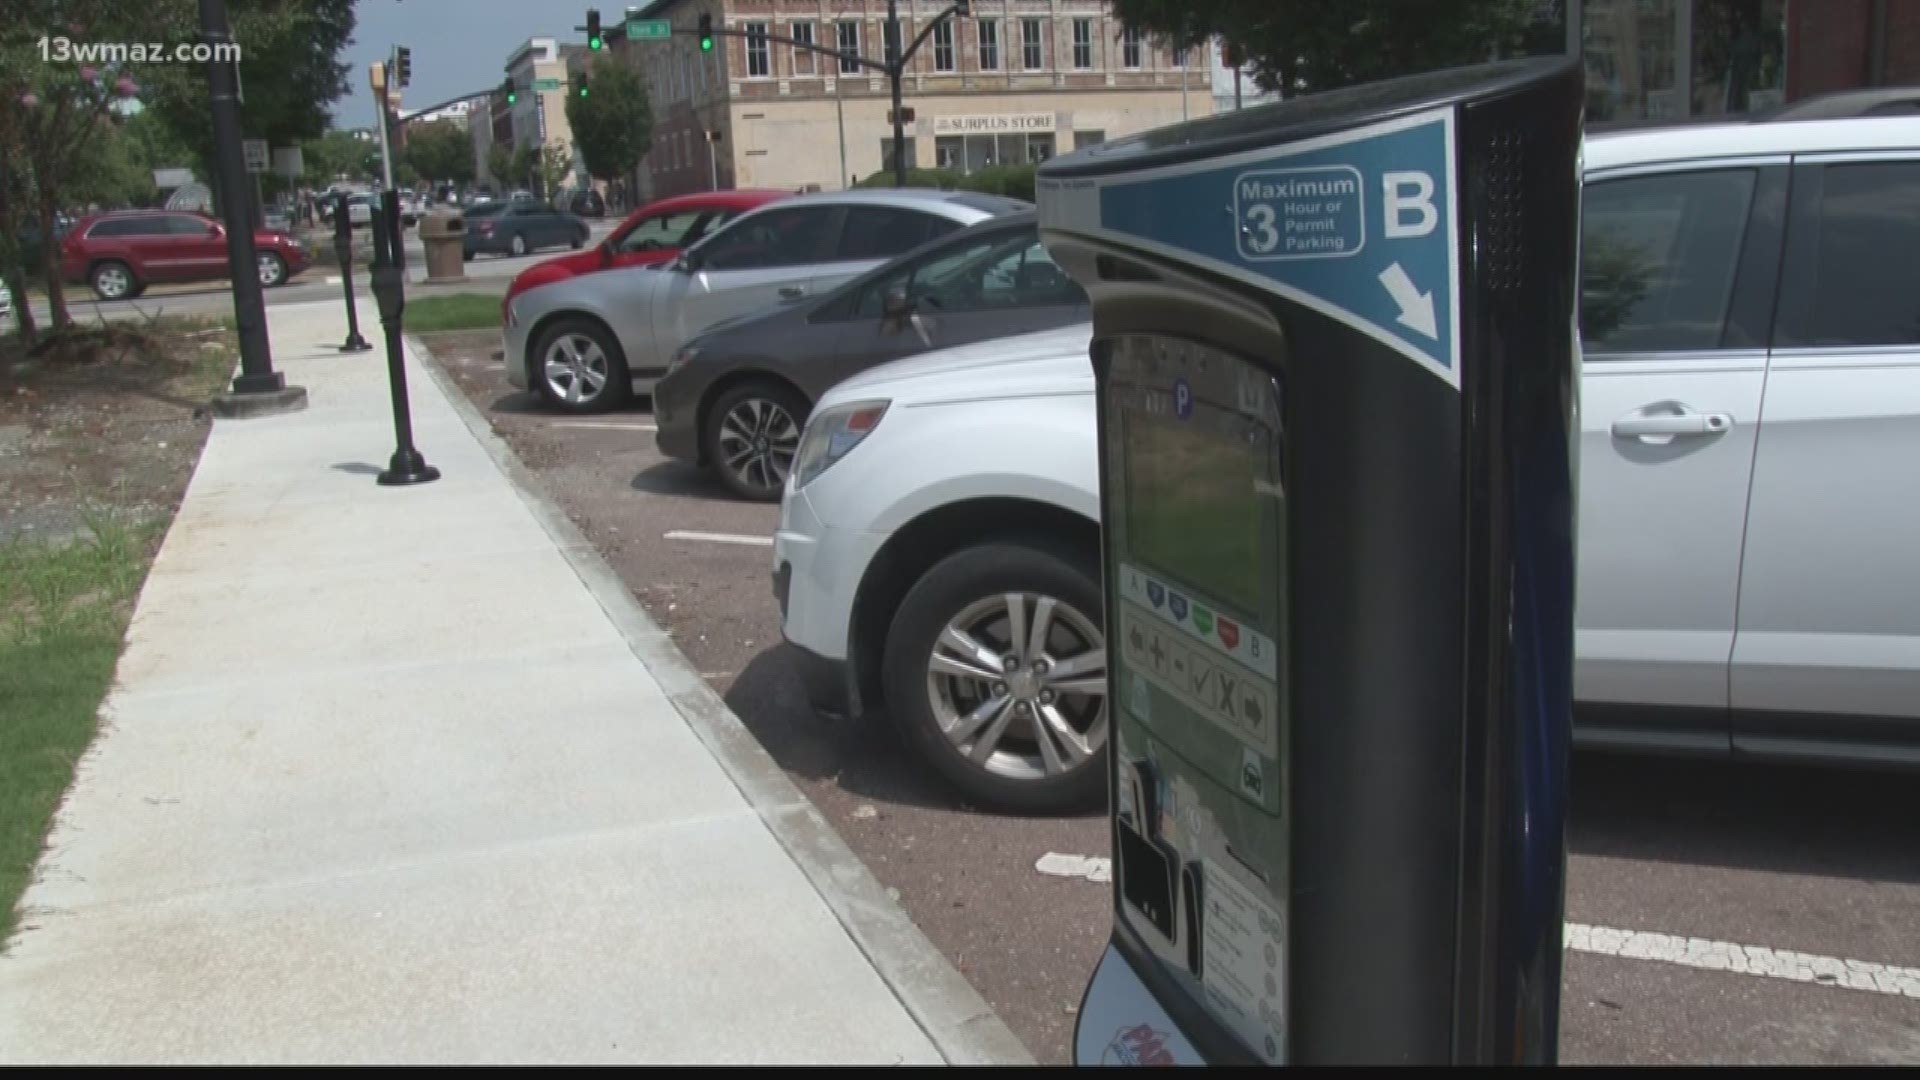 If you were in downtown Macon this time last year, you may remember using the parking meters for the first time. Pepper Baker tells us how people are feeling about them a year later.